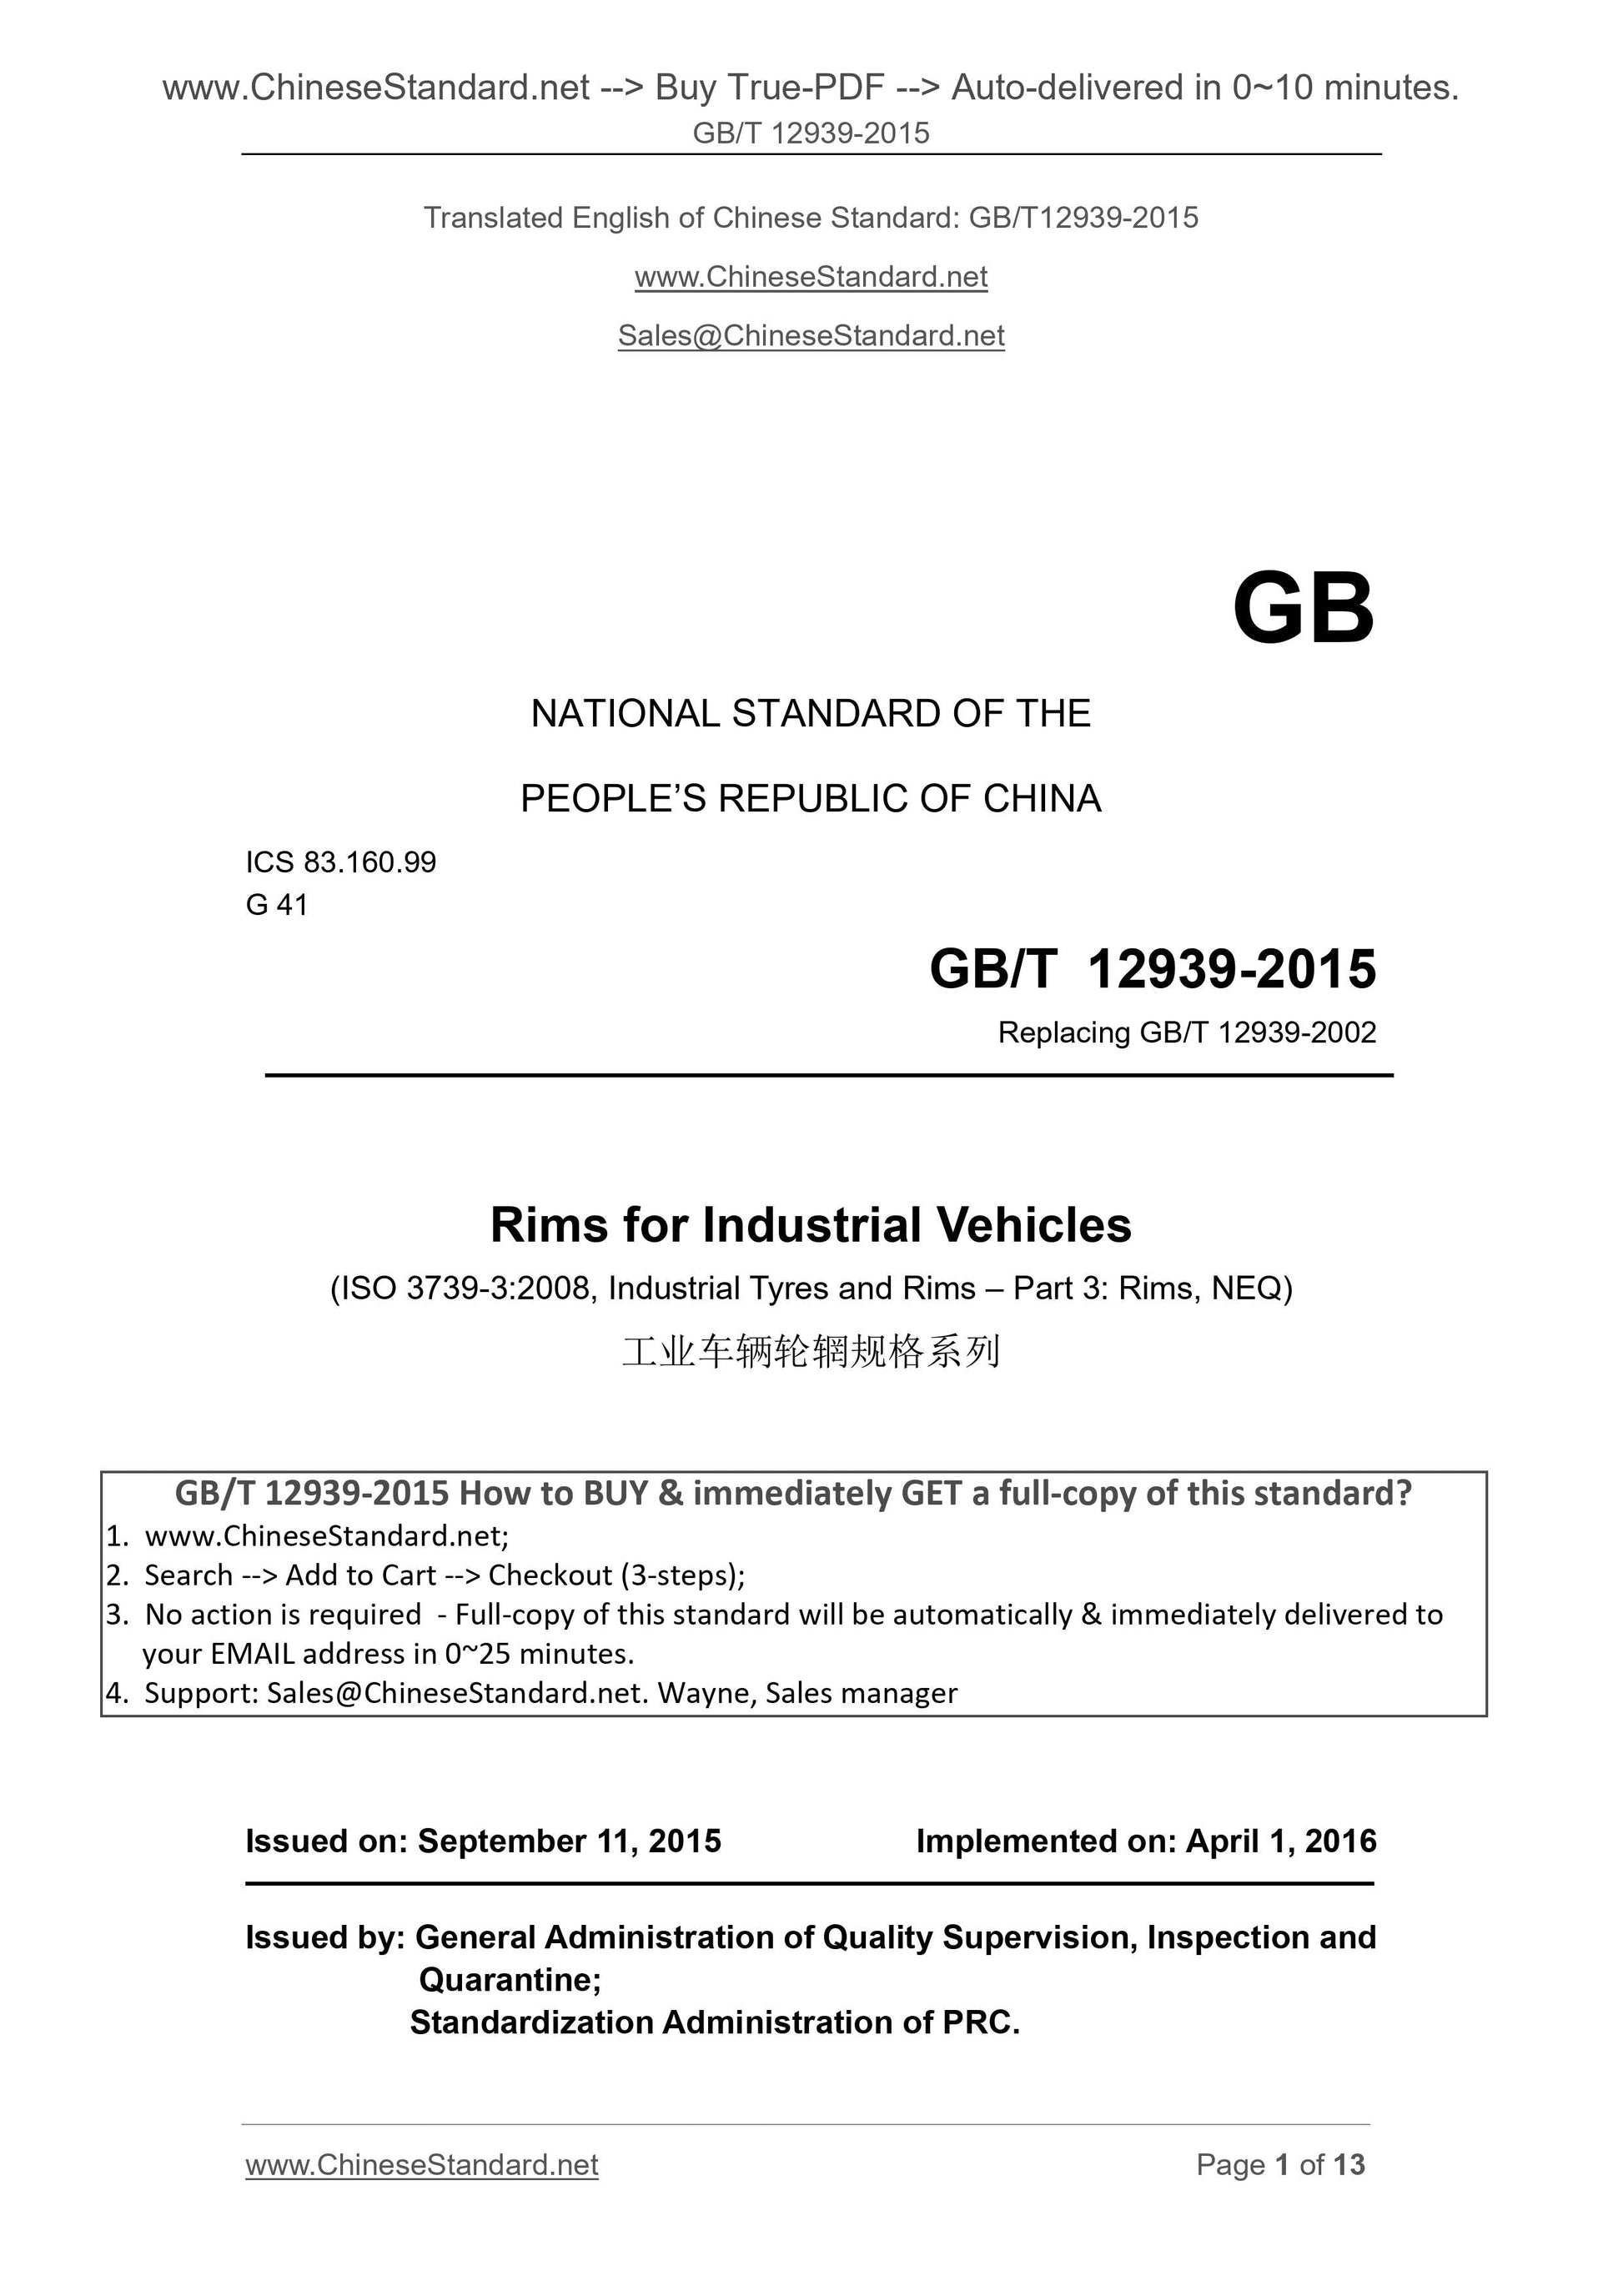 GB/T 12939-2015 Page 1